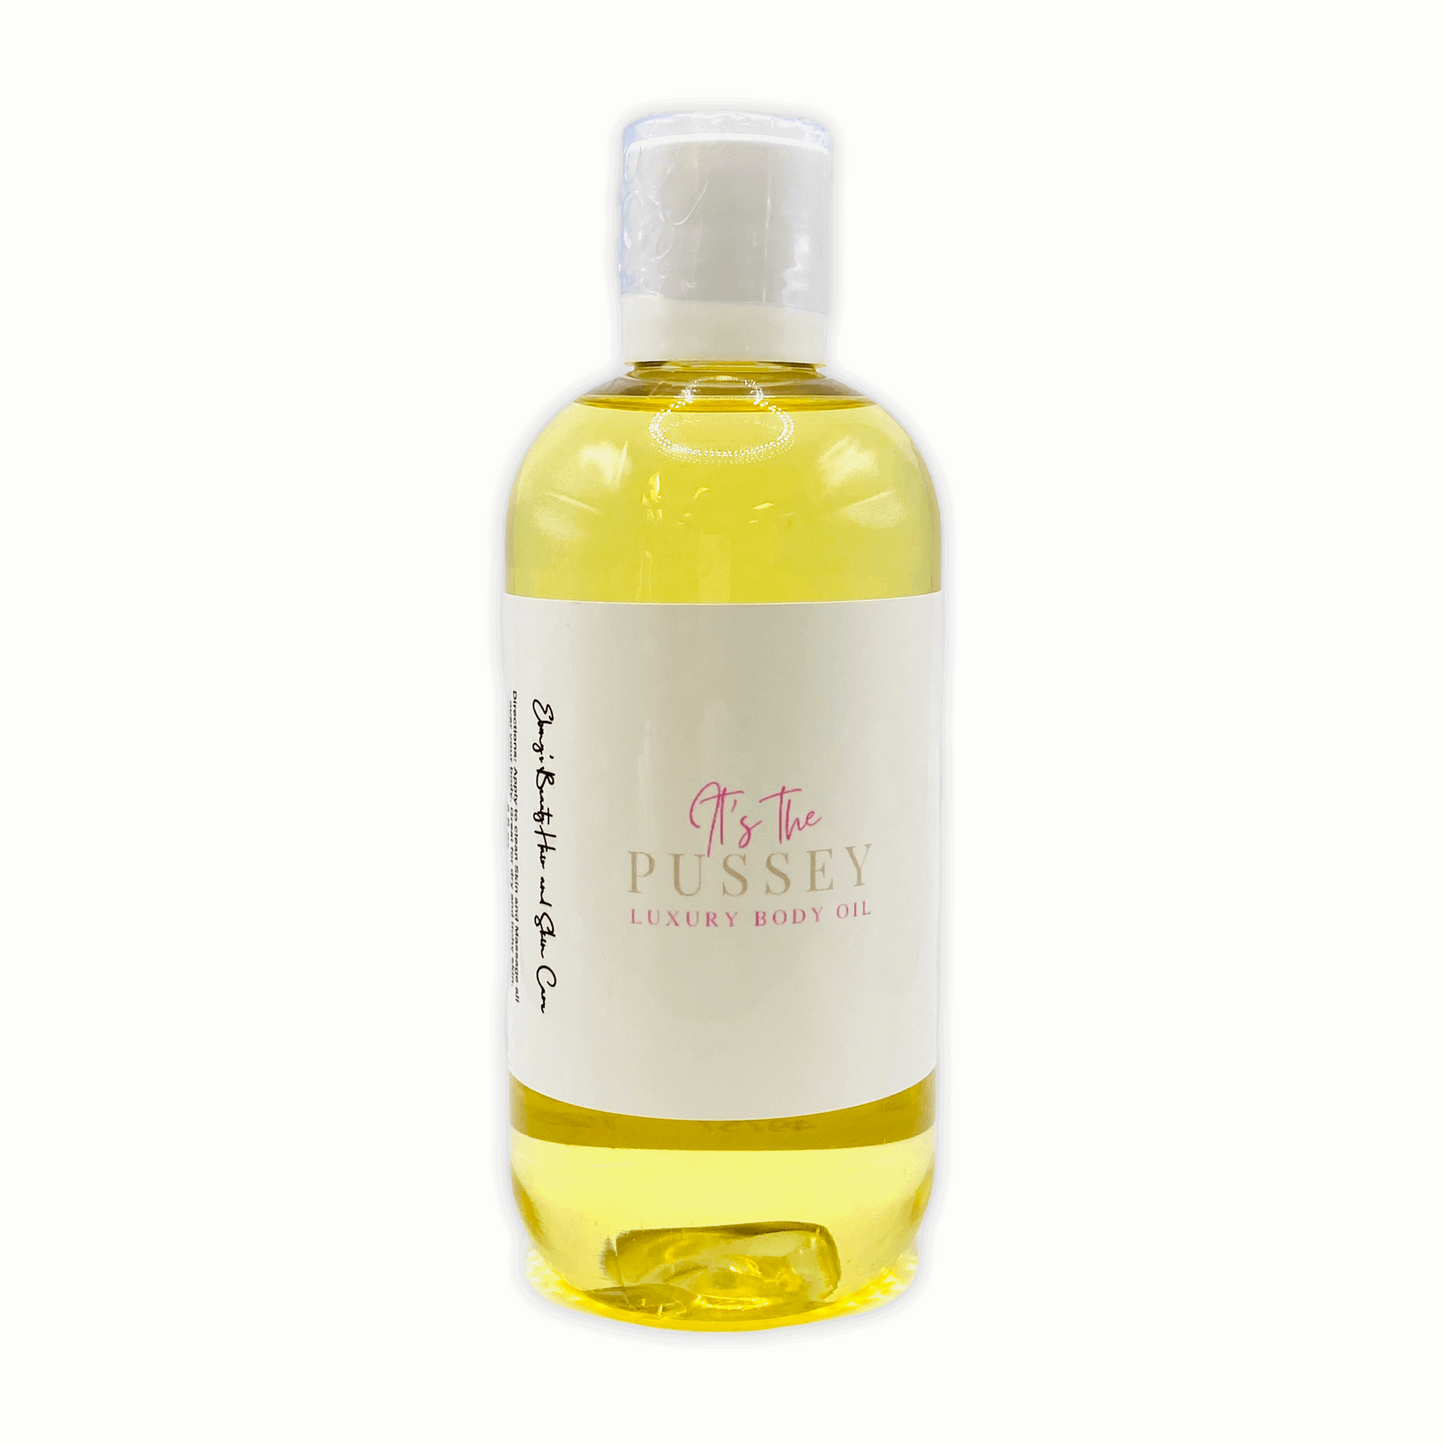 It’s The Pussey for Me Body Oil